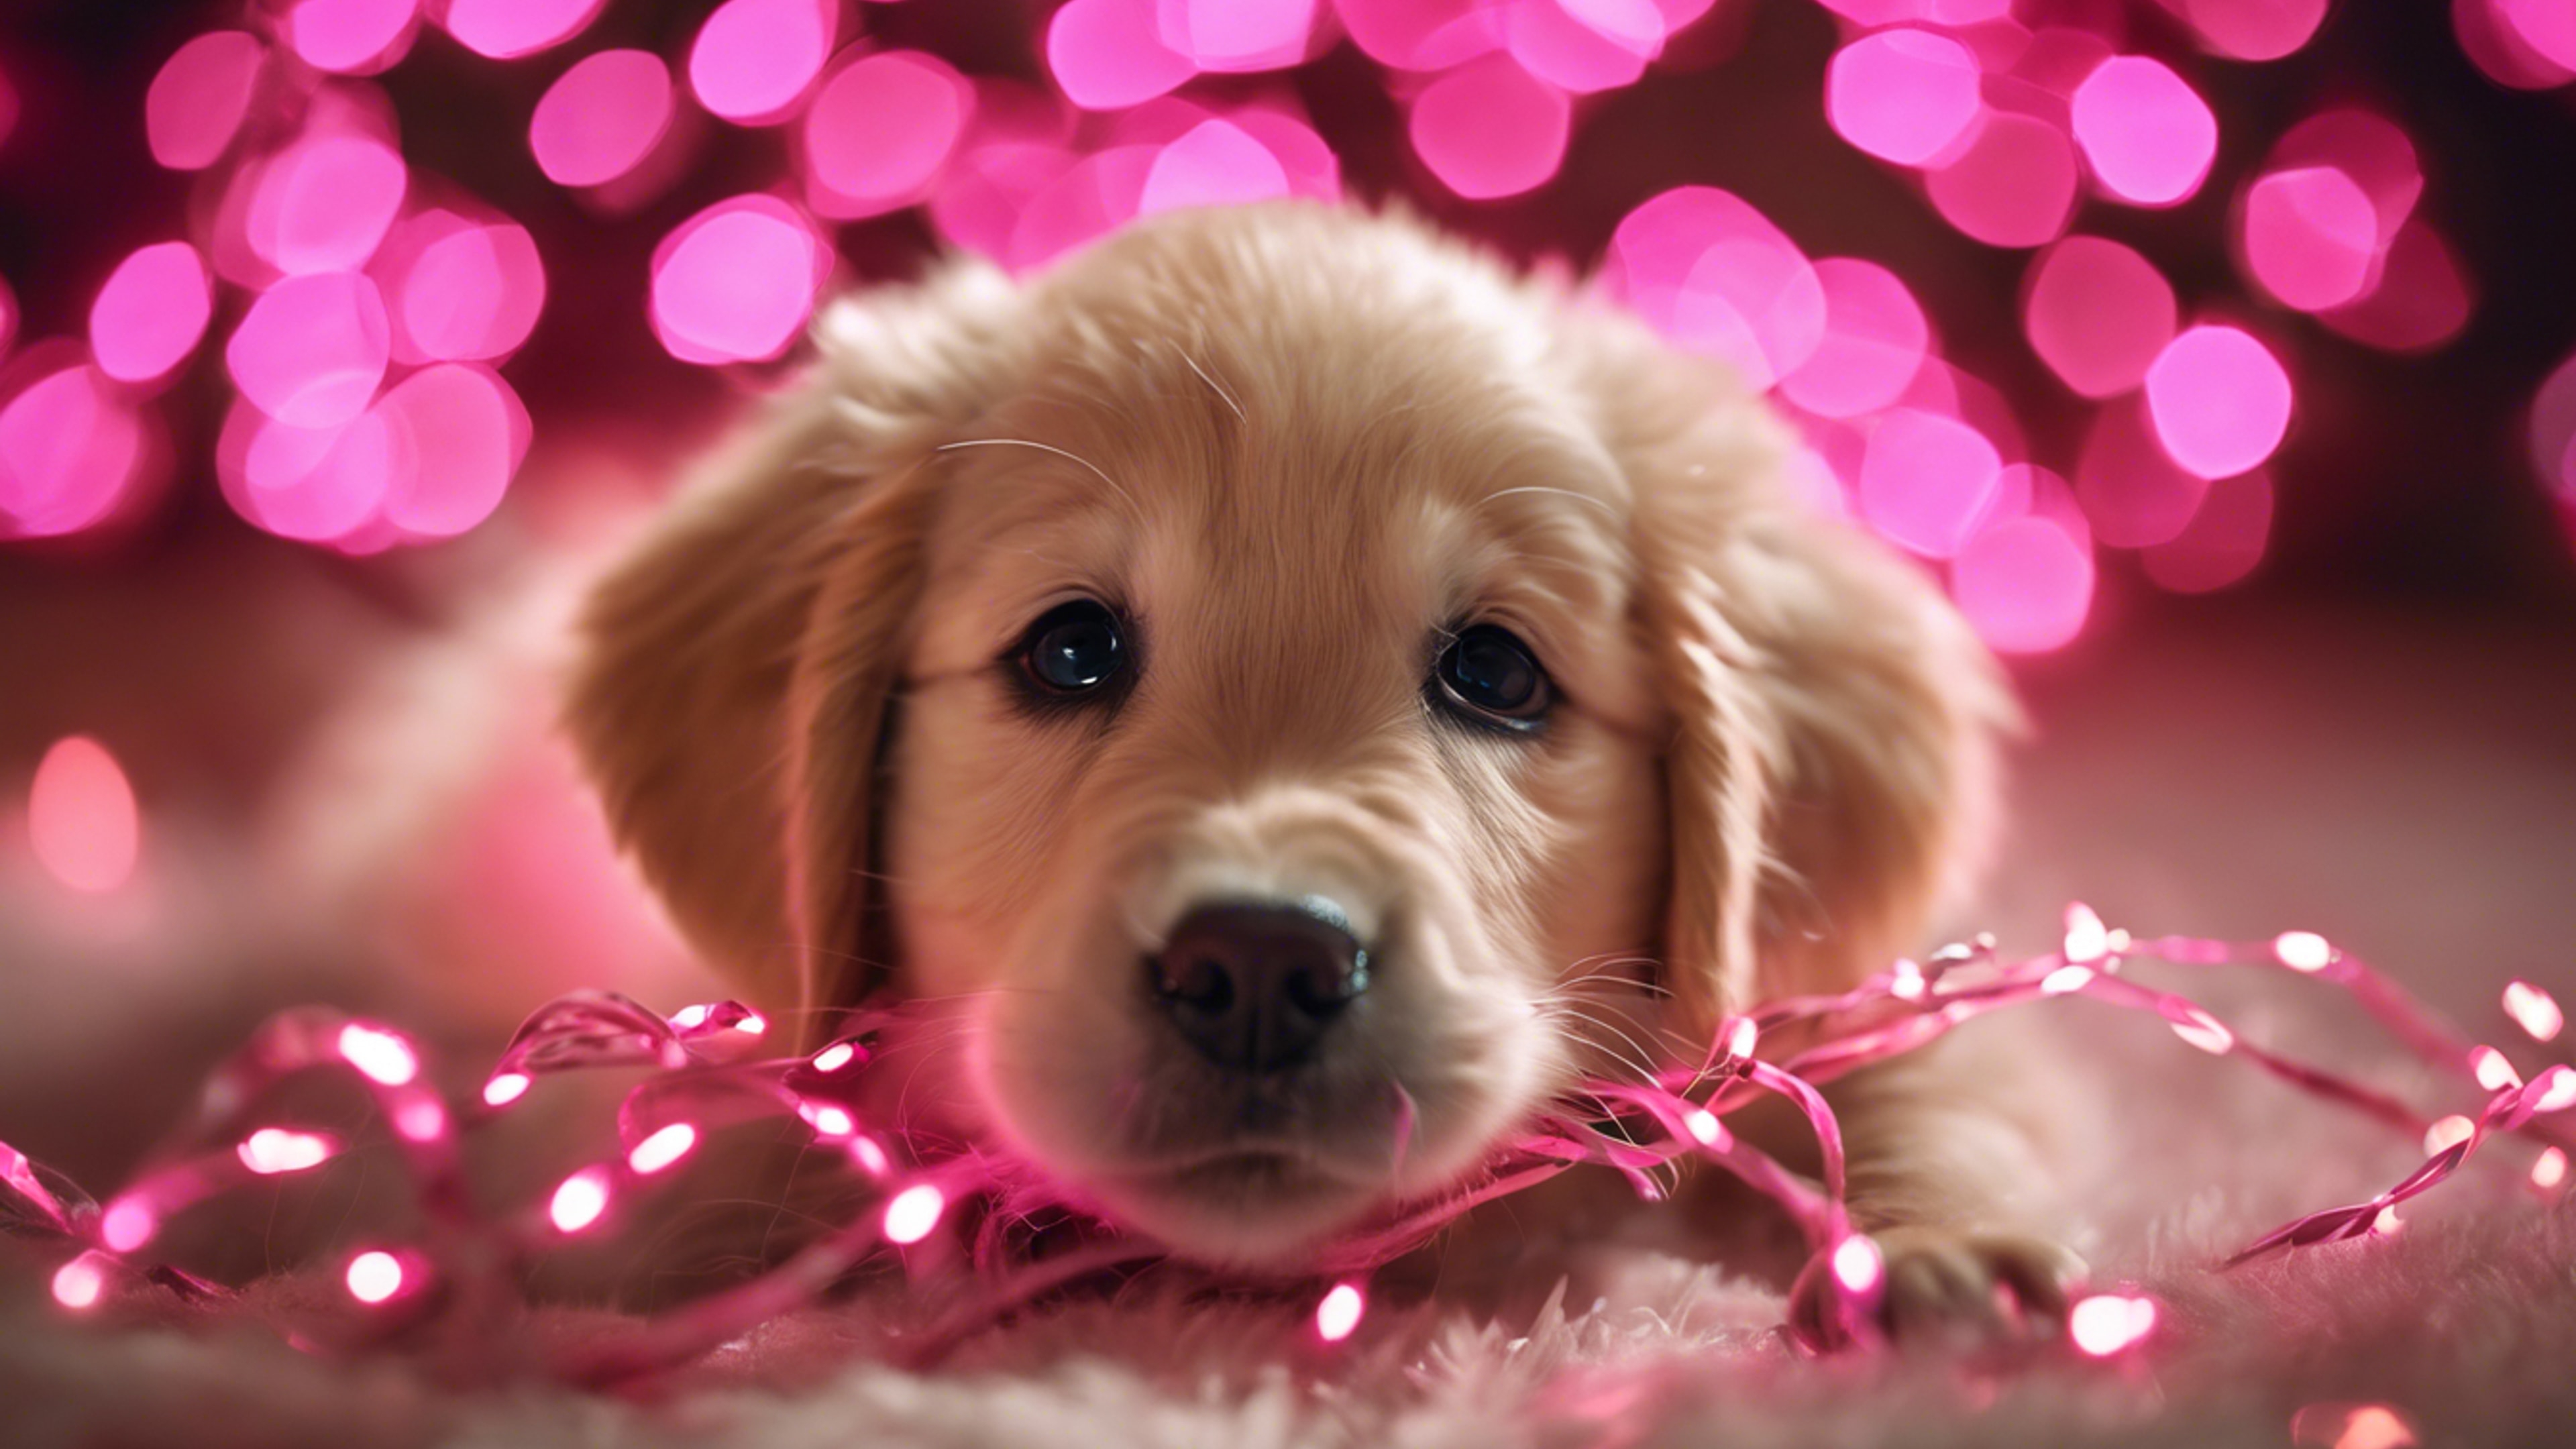 A golden retriever puppy adorably tangled in pink Christmas lights. Tapeta[26994d3815c0460ab11e]